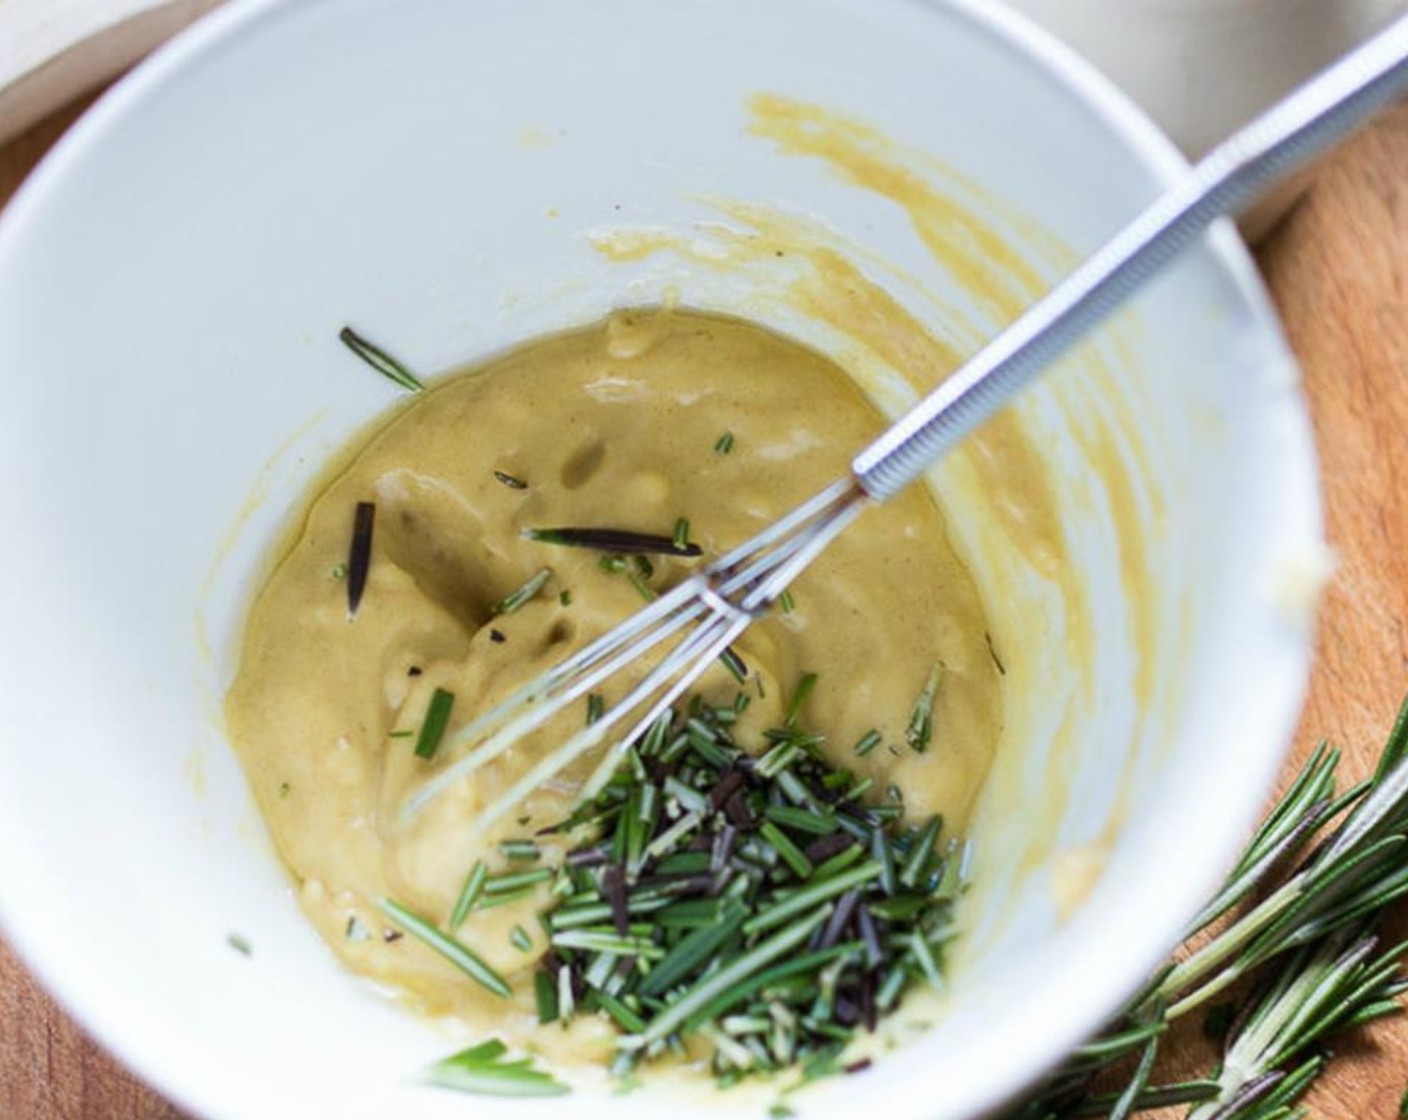 step 6 In a small bowl, mix Dijon Mustard (1/4 cup), Olive Oil (1/4 cup), Garlic (3 cloves), Fresh Rosemary (1 Tbsp), Salt (1/2 tsp), and Ground Black Pepper (1/2 tsp) until incorporated.